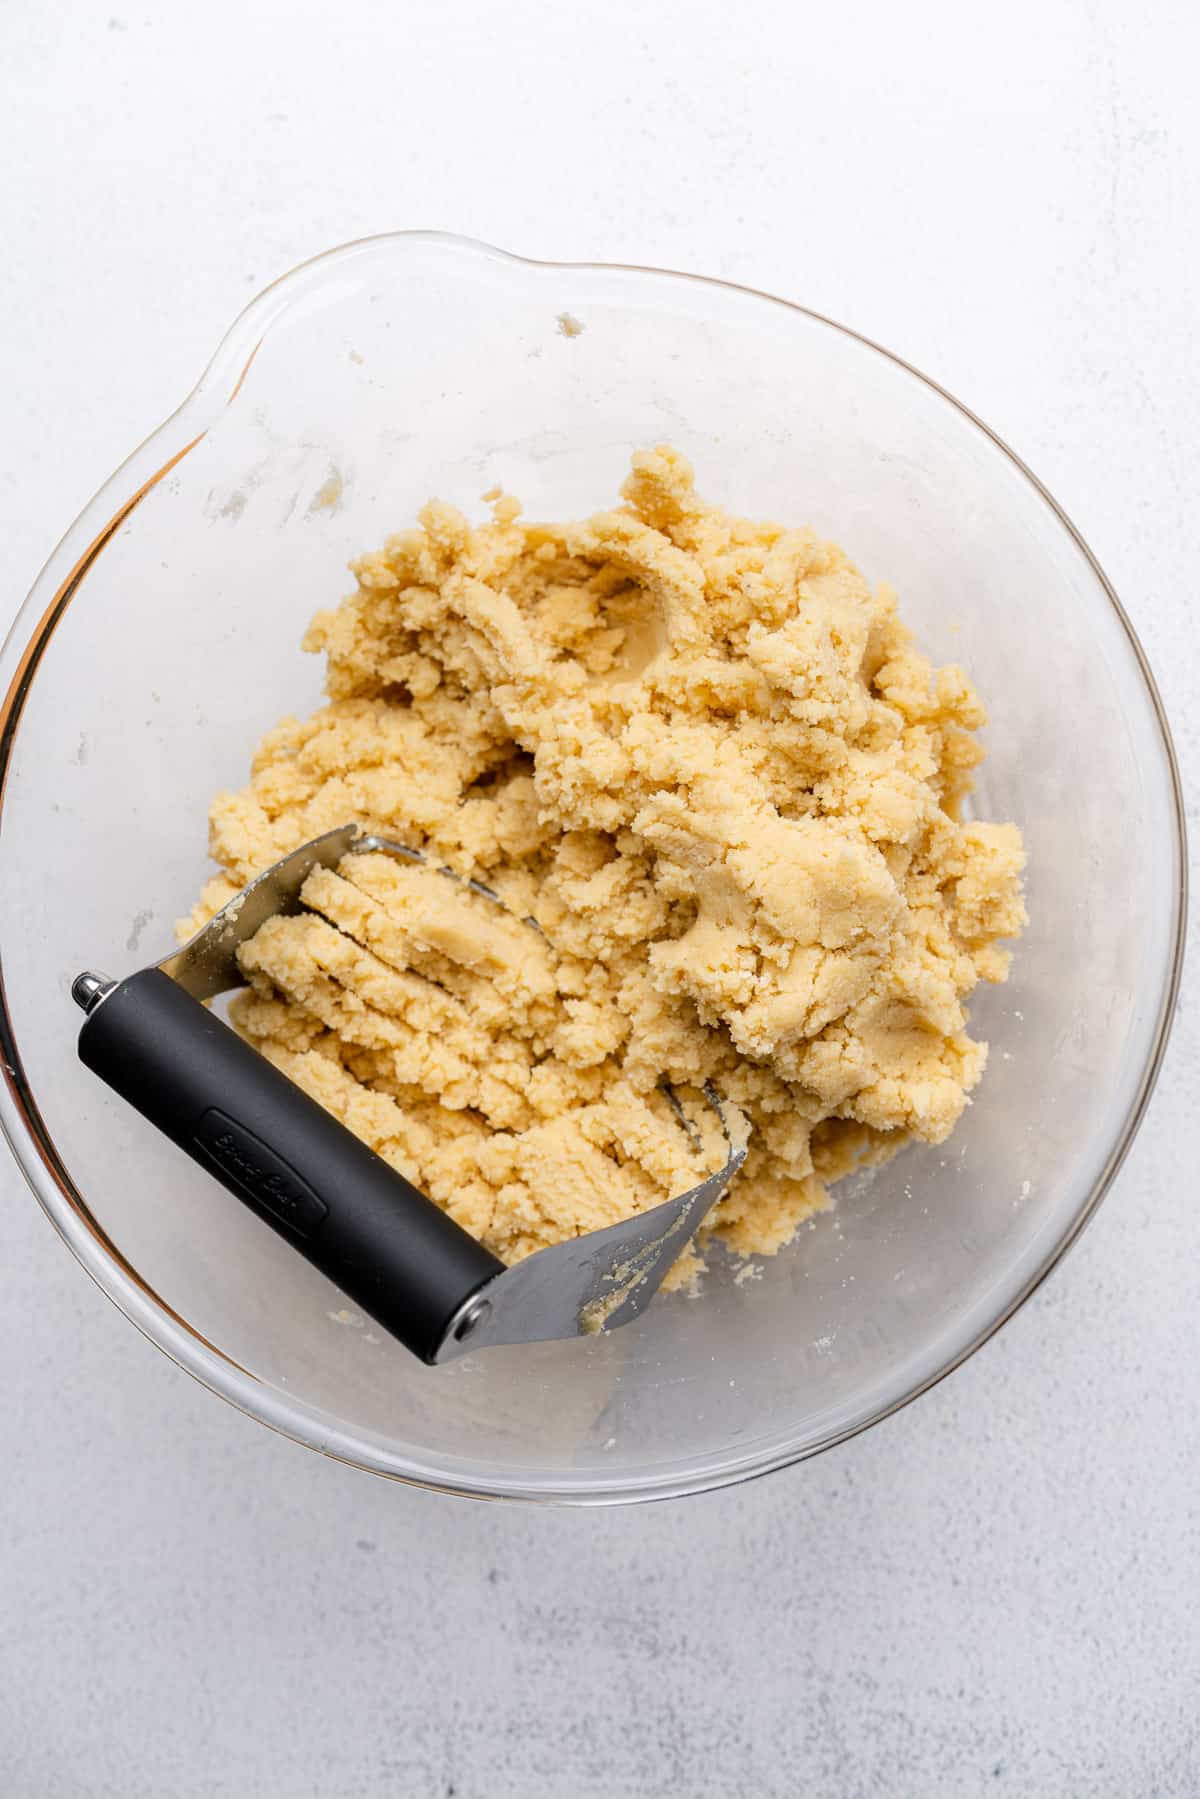 dough coming into shape in a glass bowl with a pastry cutter